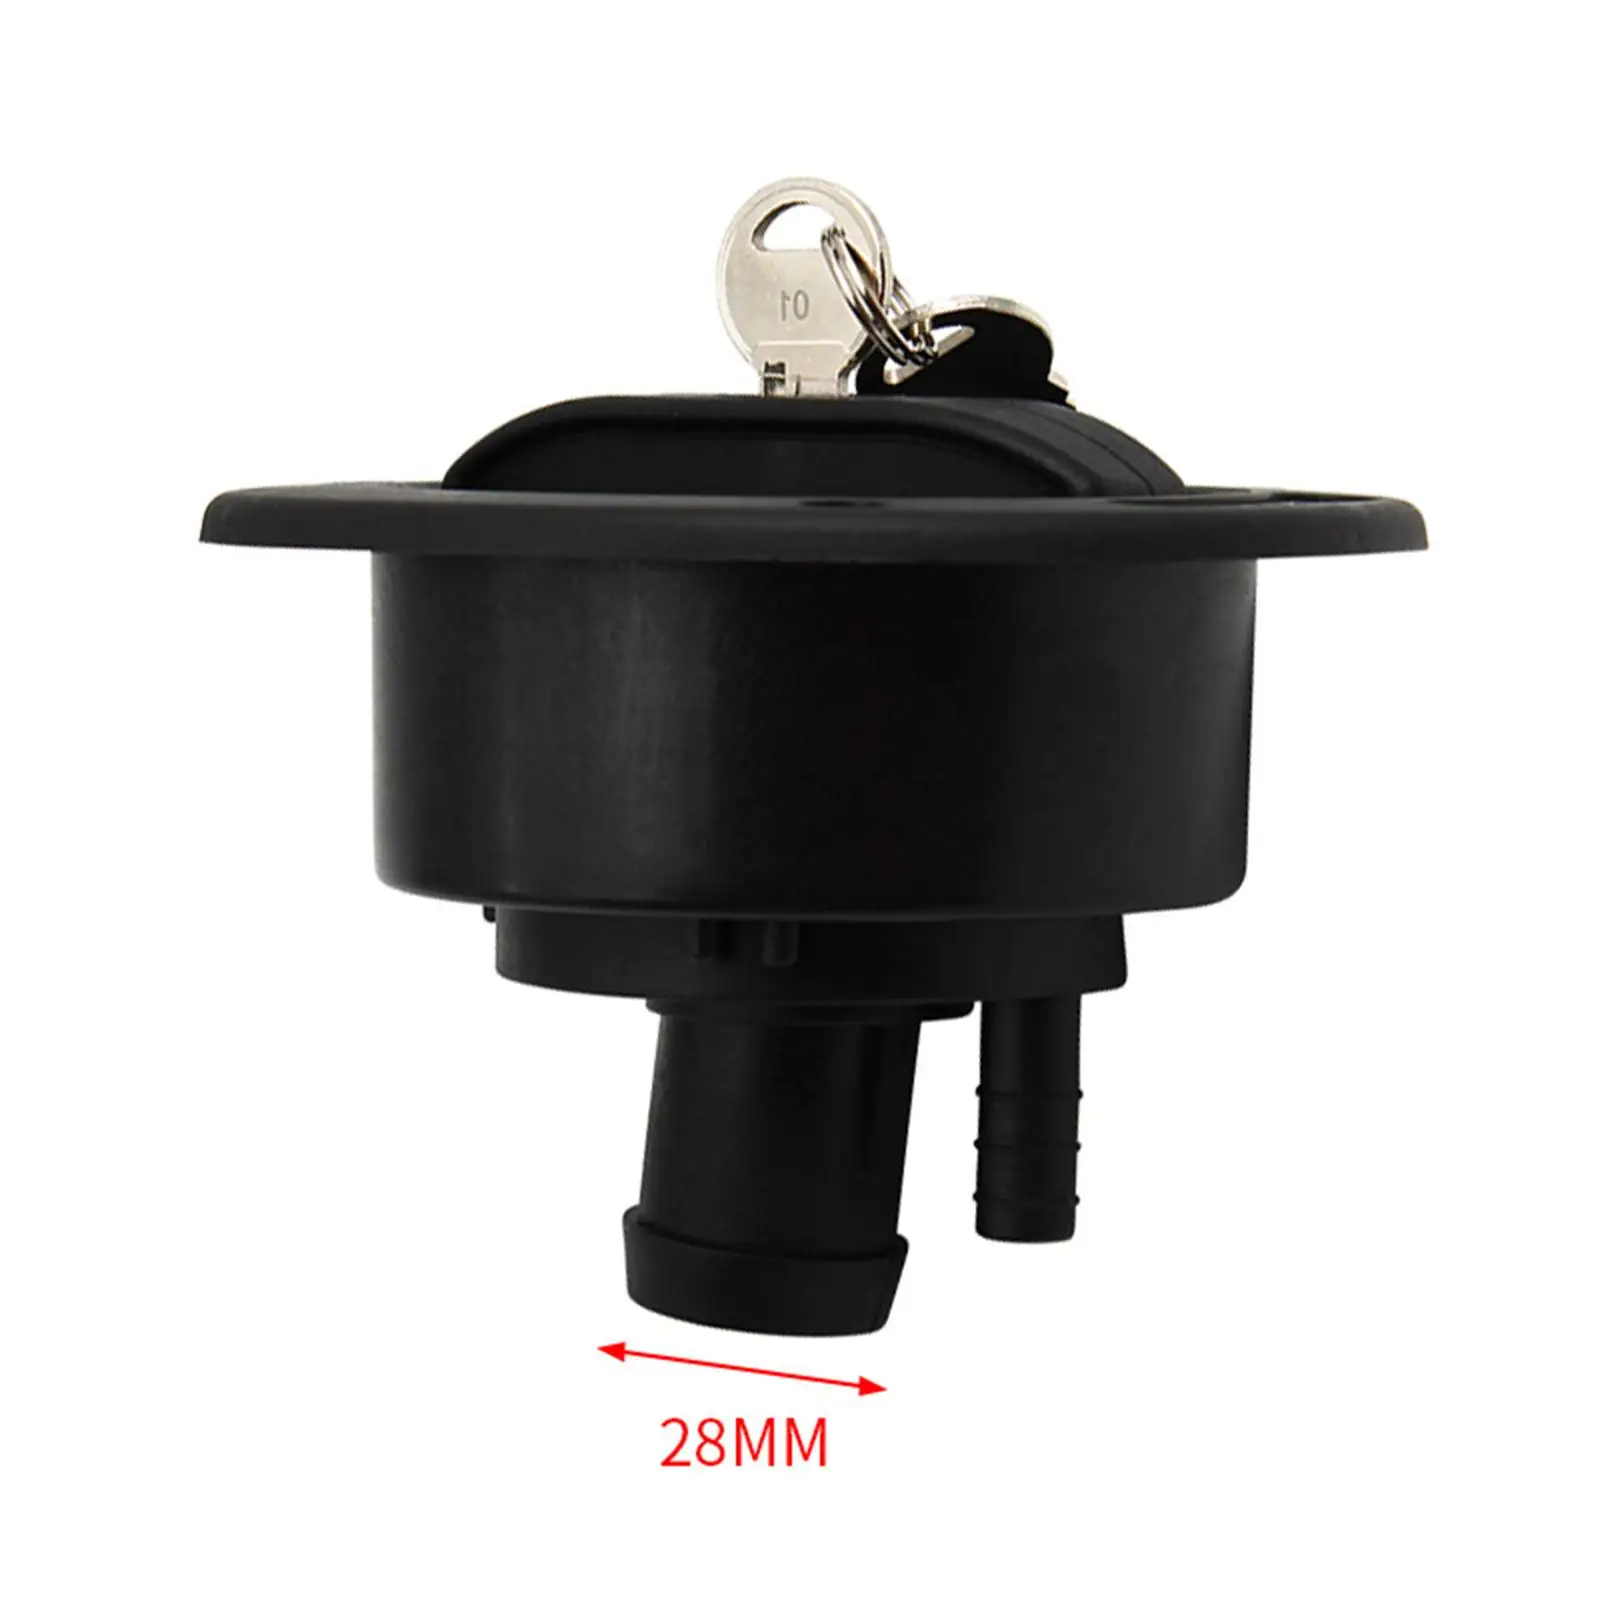 Universal Gravity Fresh Water Hatches Inlet Leakproof with 2 Keys Replace Lockable for Motorhome Camper Boat